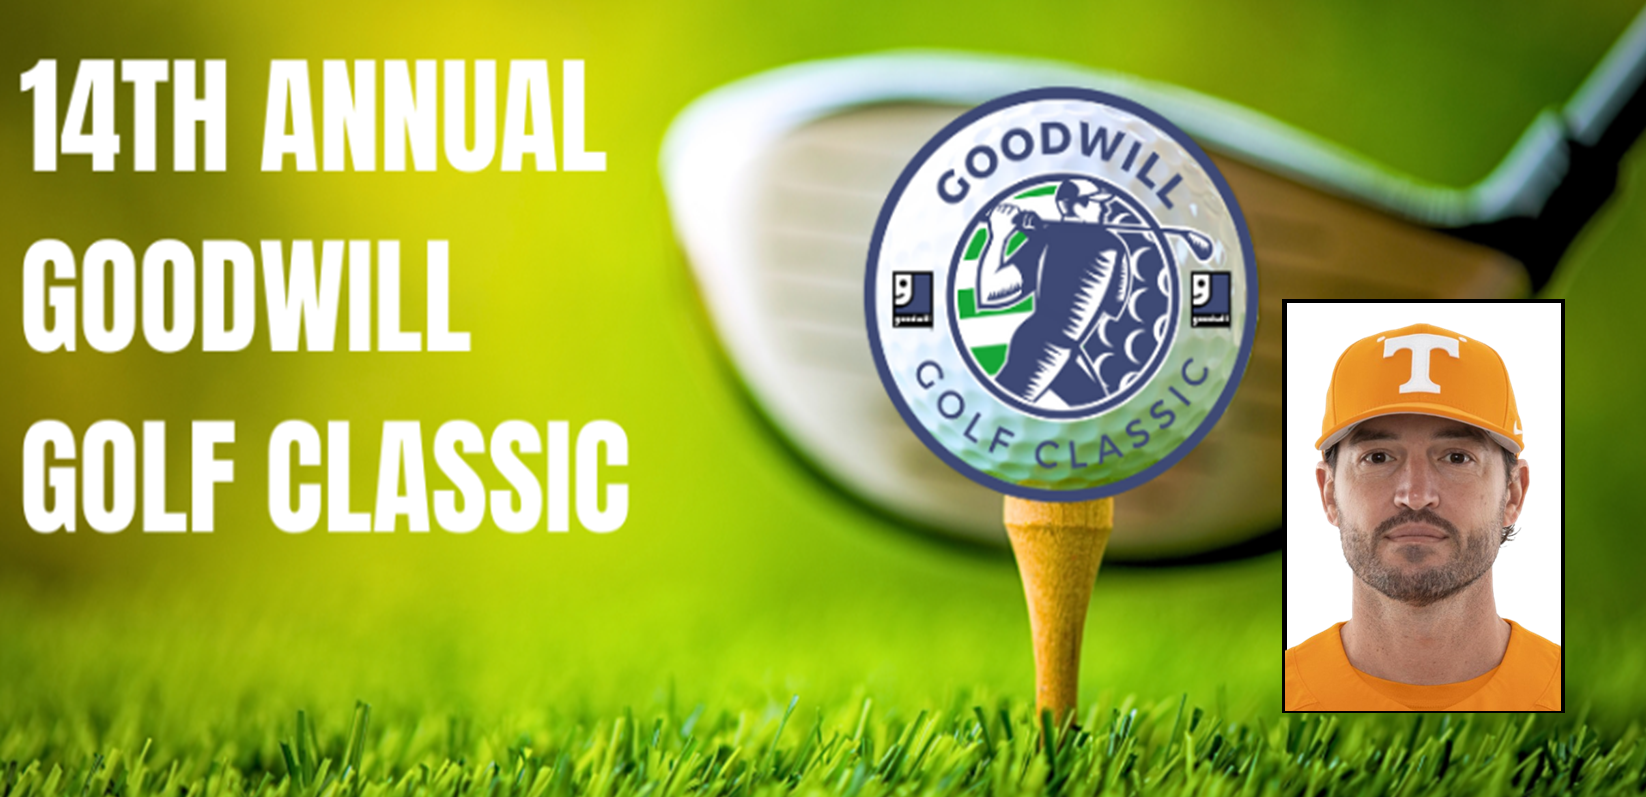 14th Annual Goodwill Golf Classic- Aug. 22nd